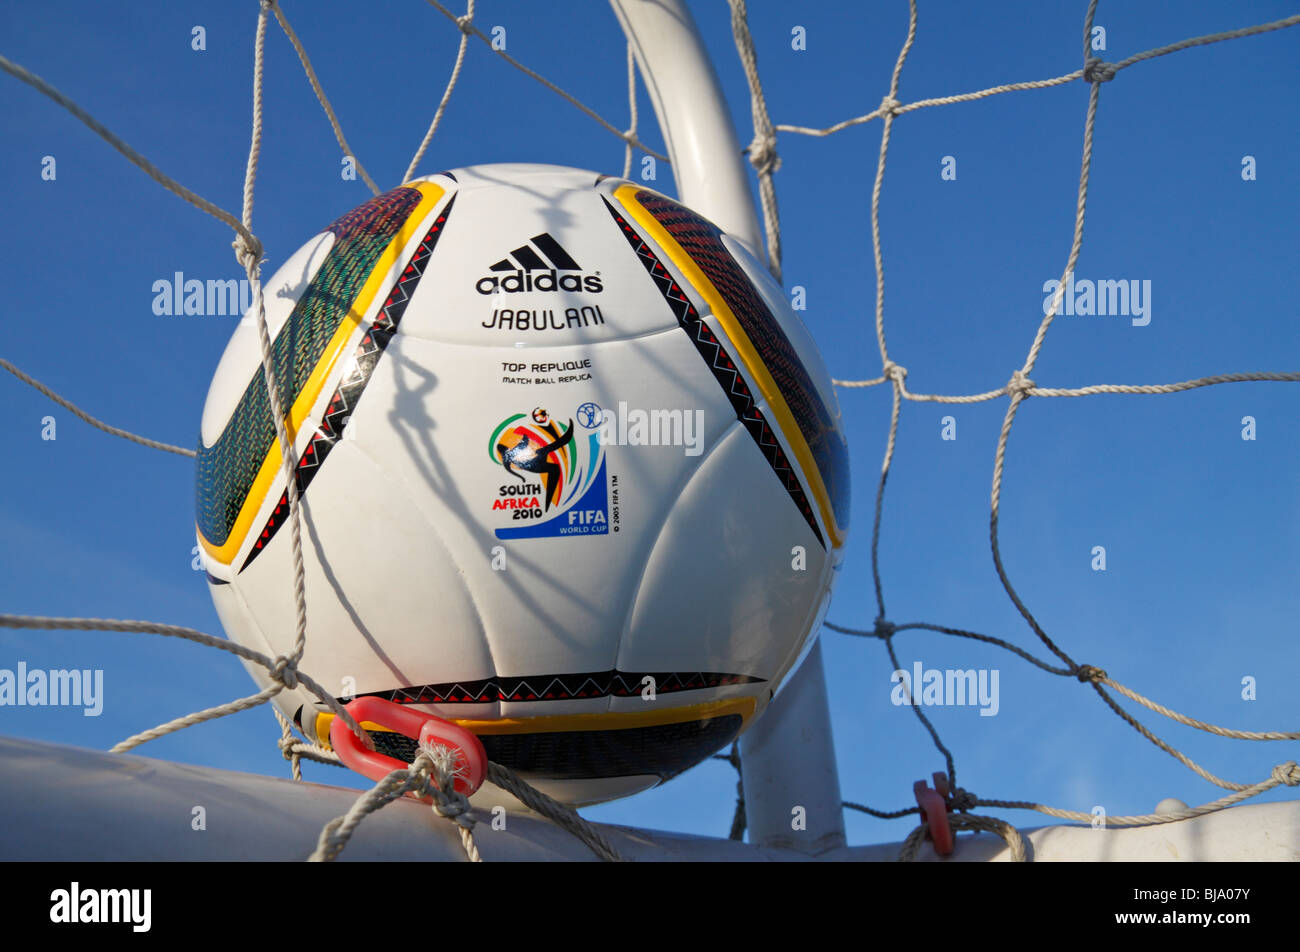 The FIFA 2010 World Cup replica match ball by Adidas, the Jabulani, in the corner of a football net. Stock Photo